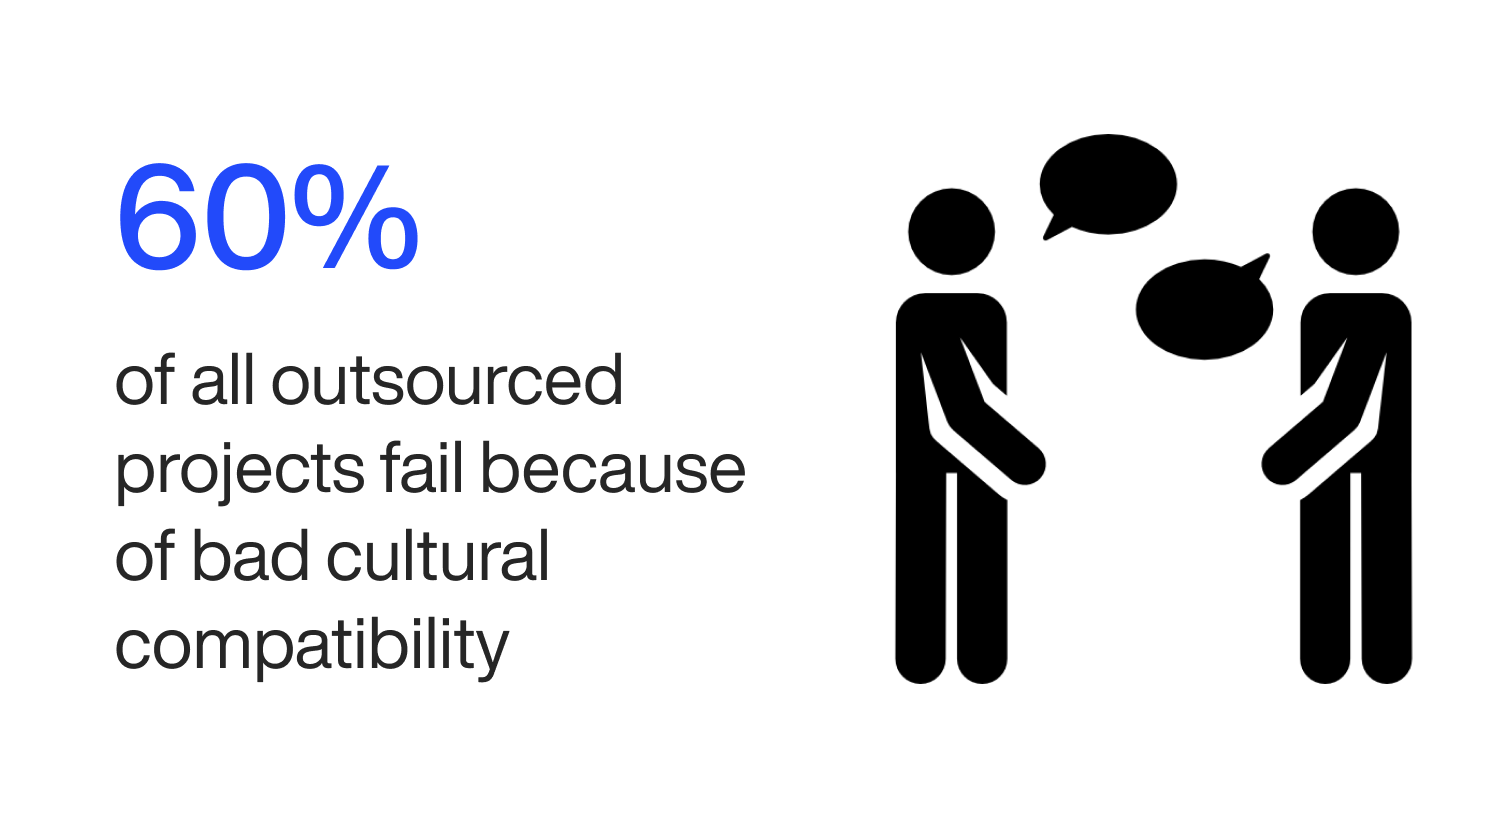 60% of outsourced projects fail because of bad cultural compatibility